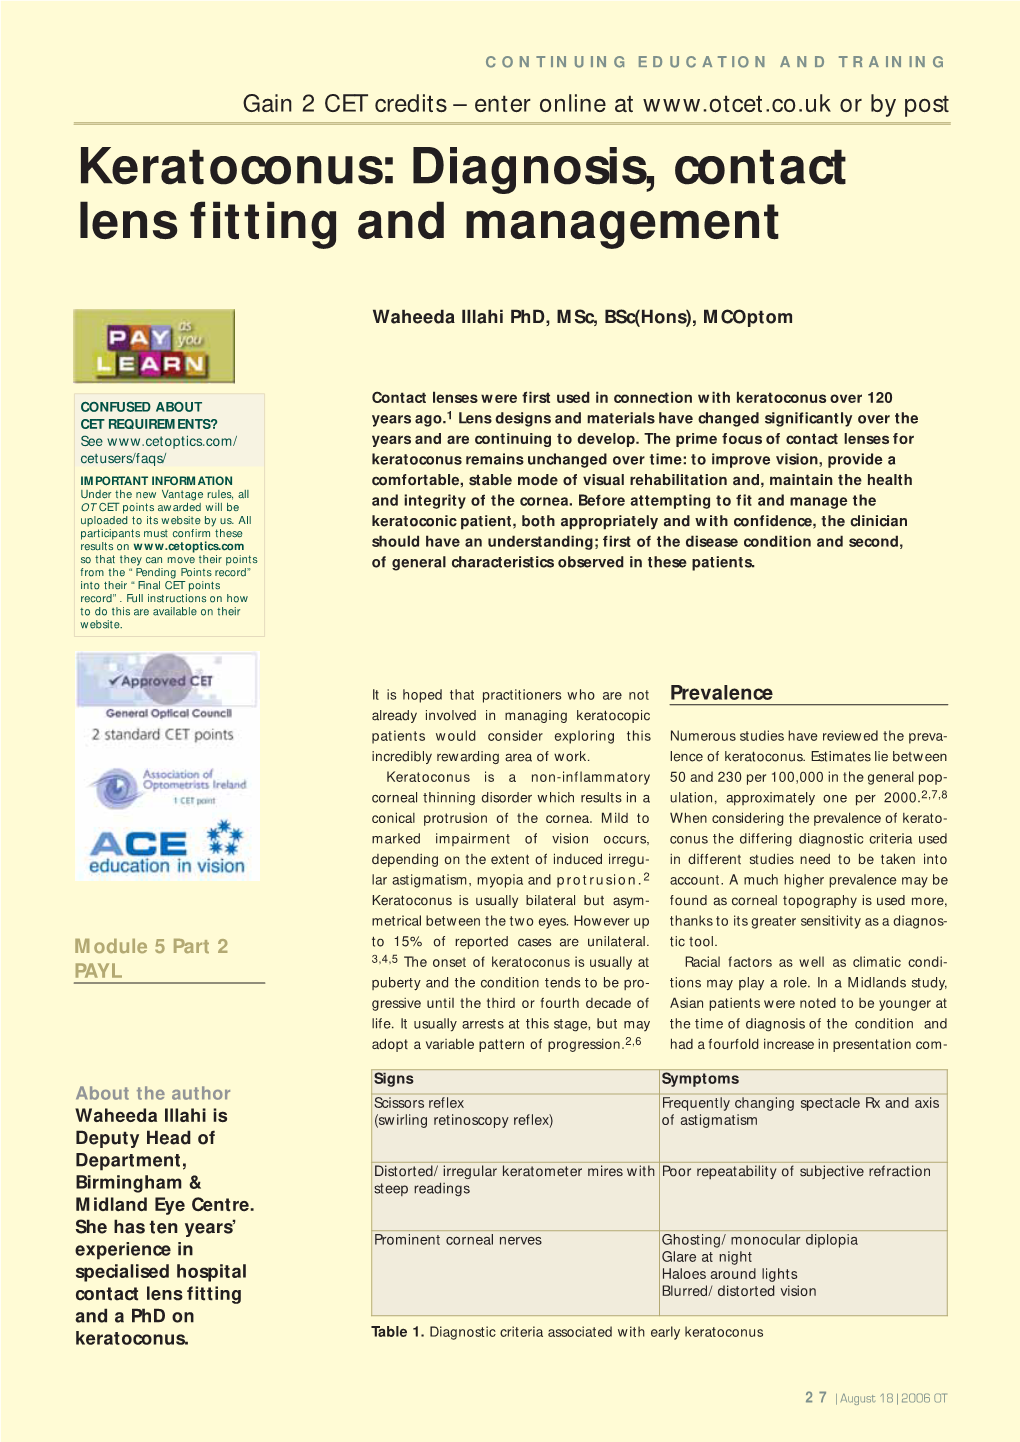 Keratoconus: Diagnosis, Contact Lens Fitting and Management